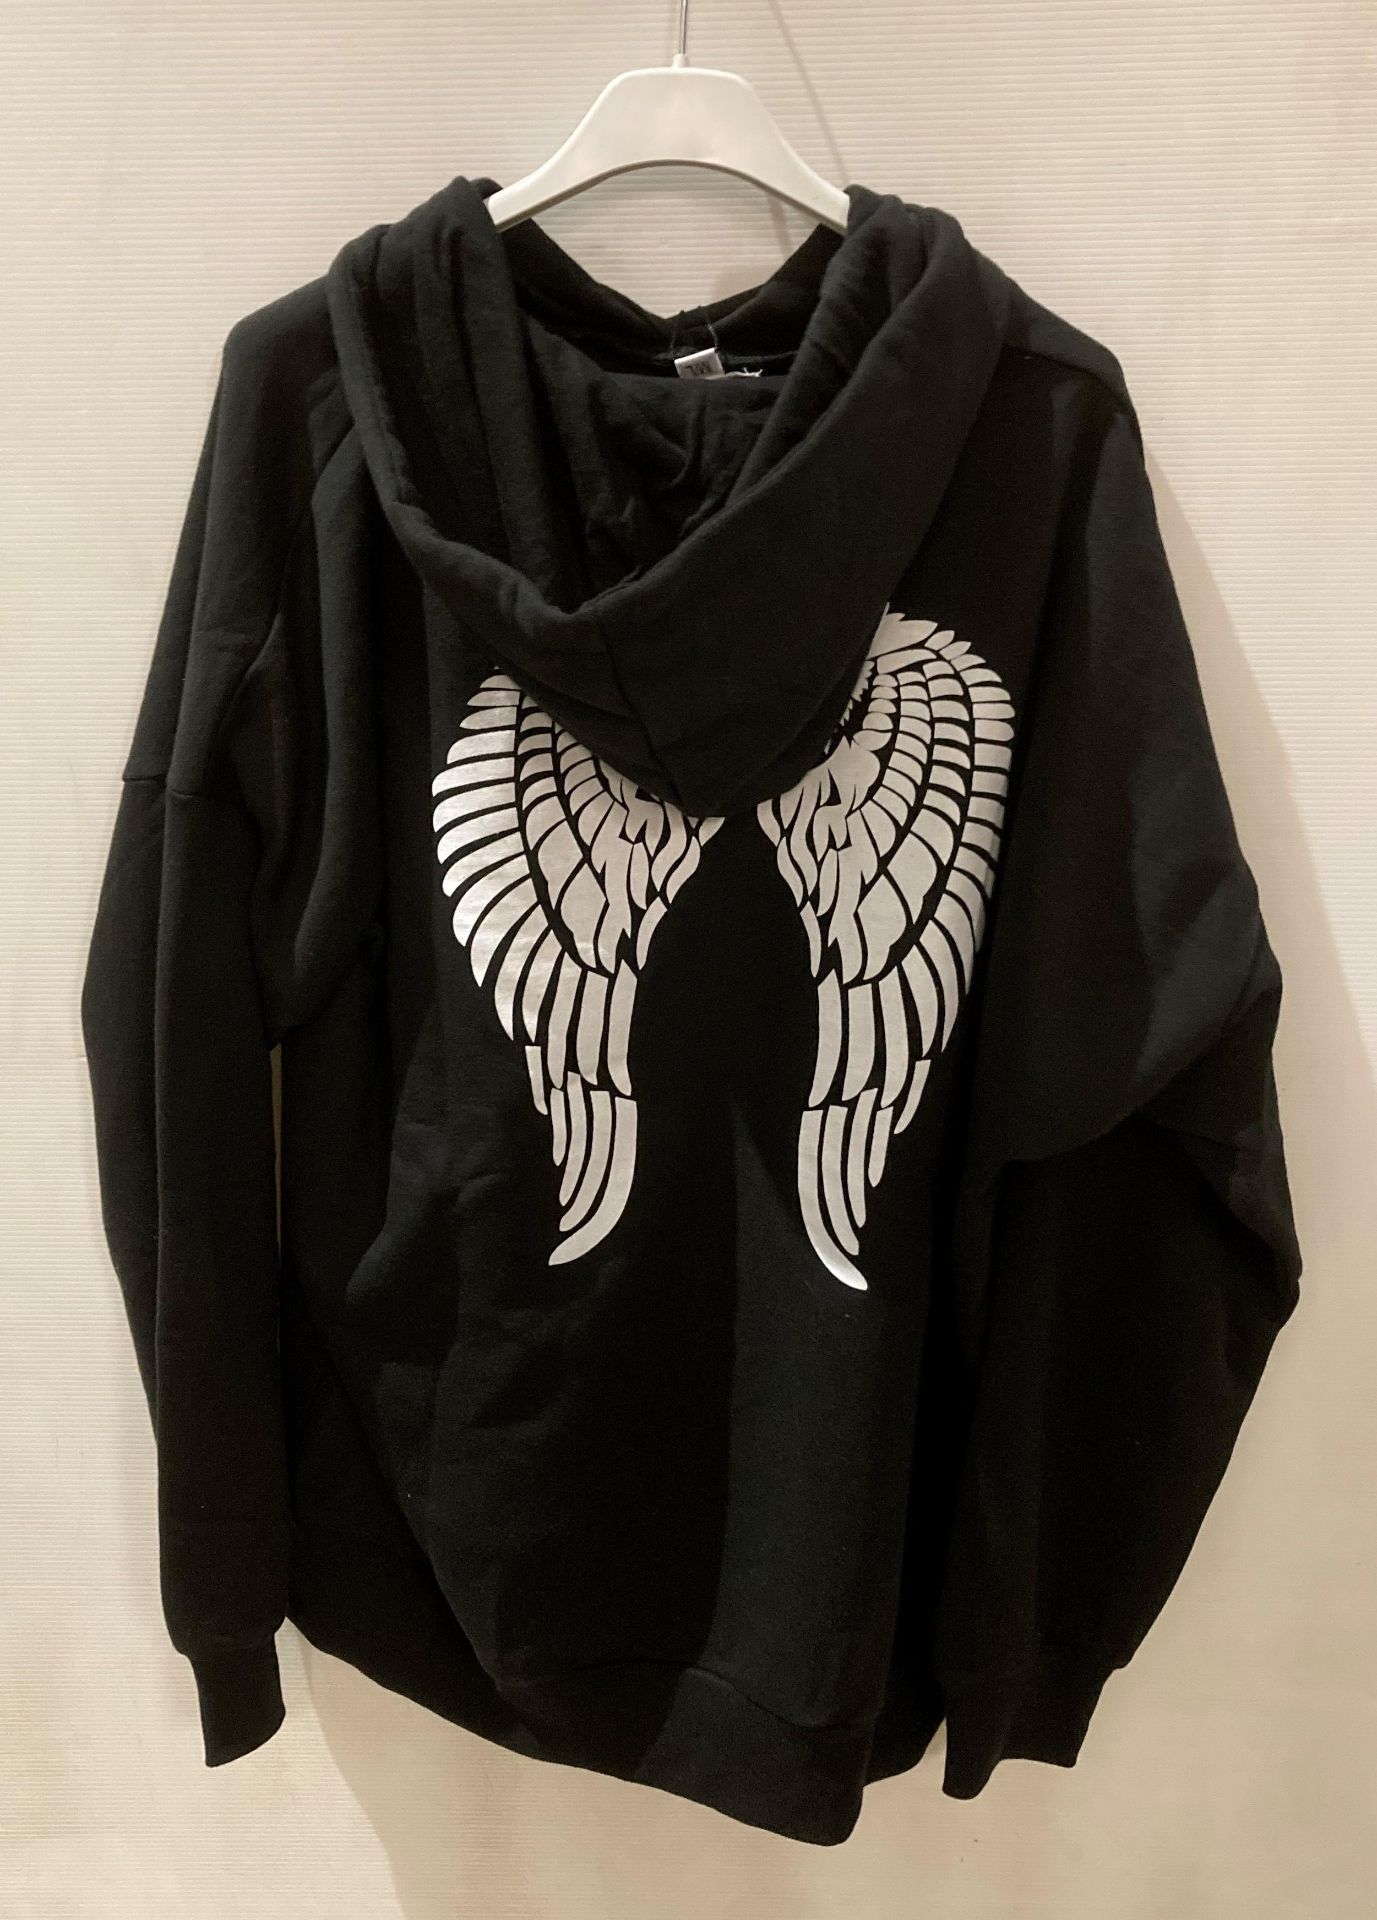 11 x GQ (Gypsy Queen) black hoodies with angel wing print to back, sizes S/M, - Image 2 of 2